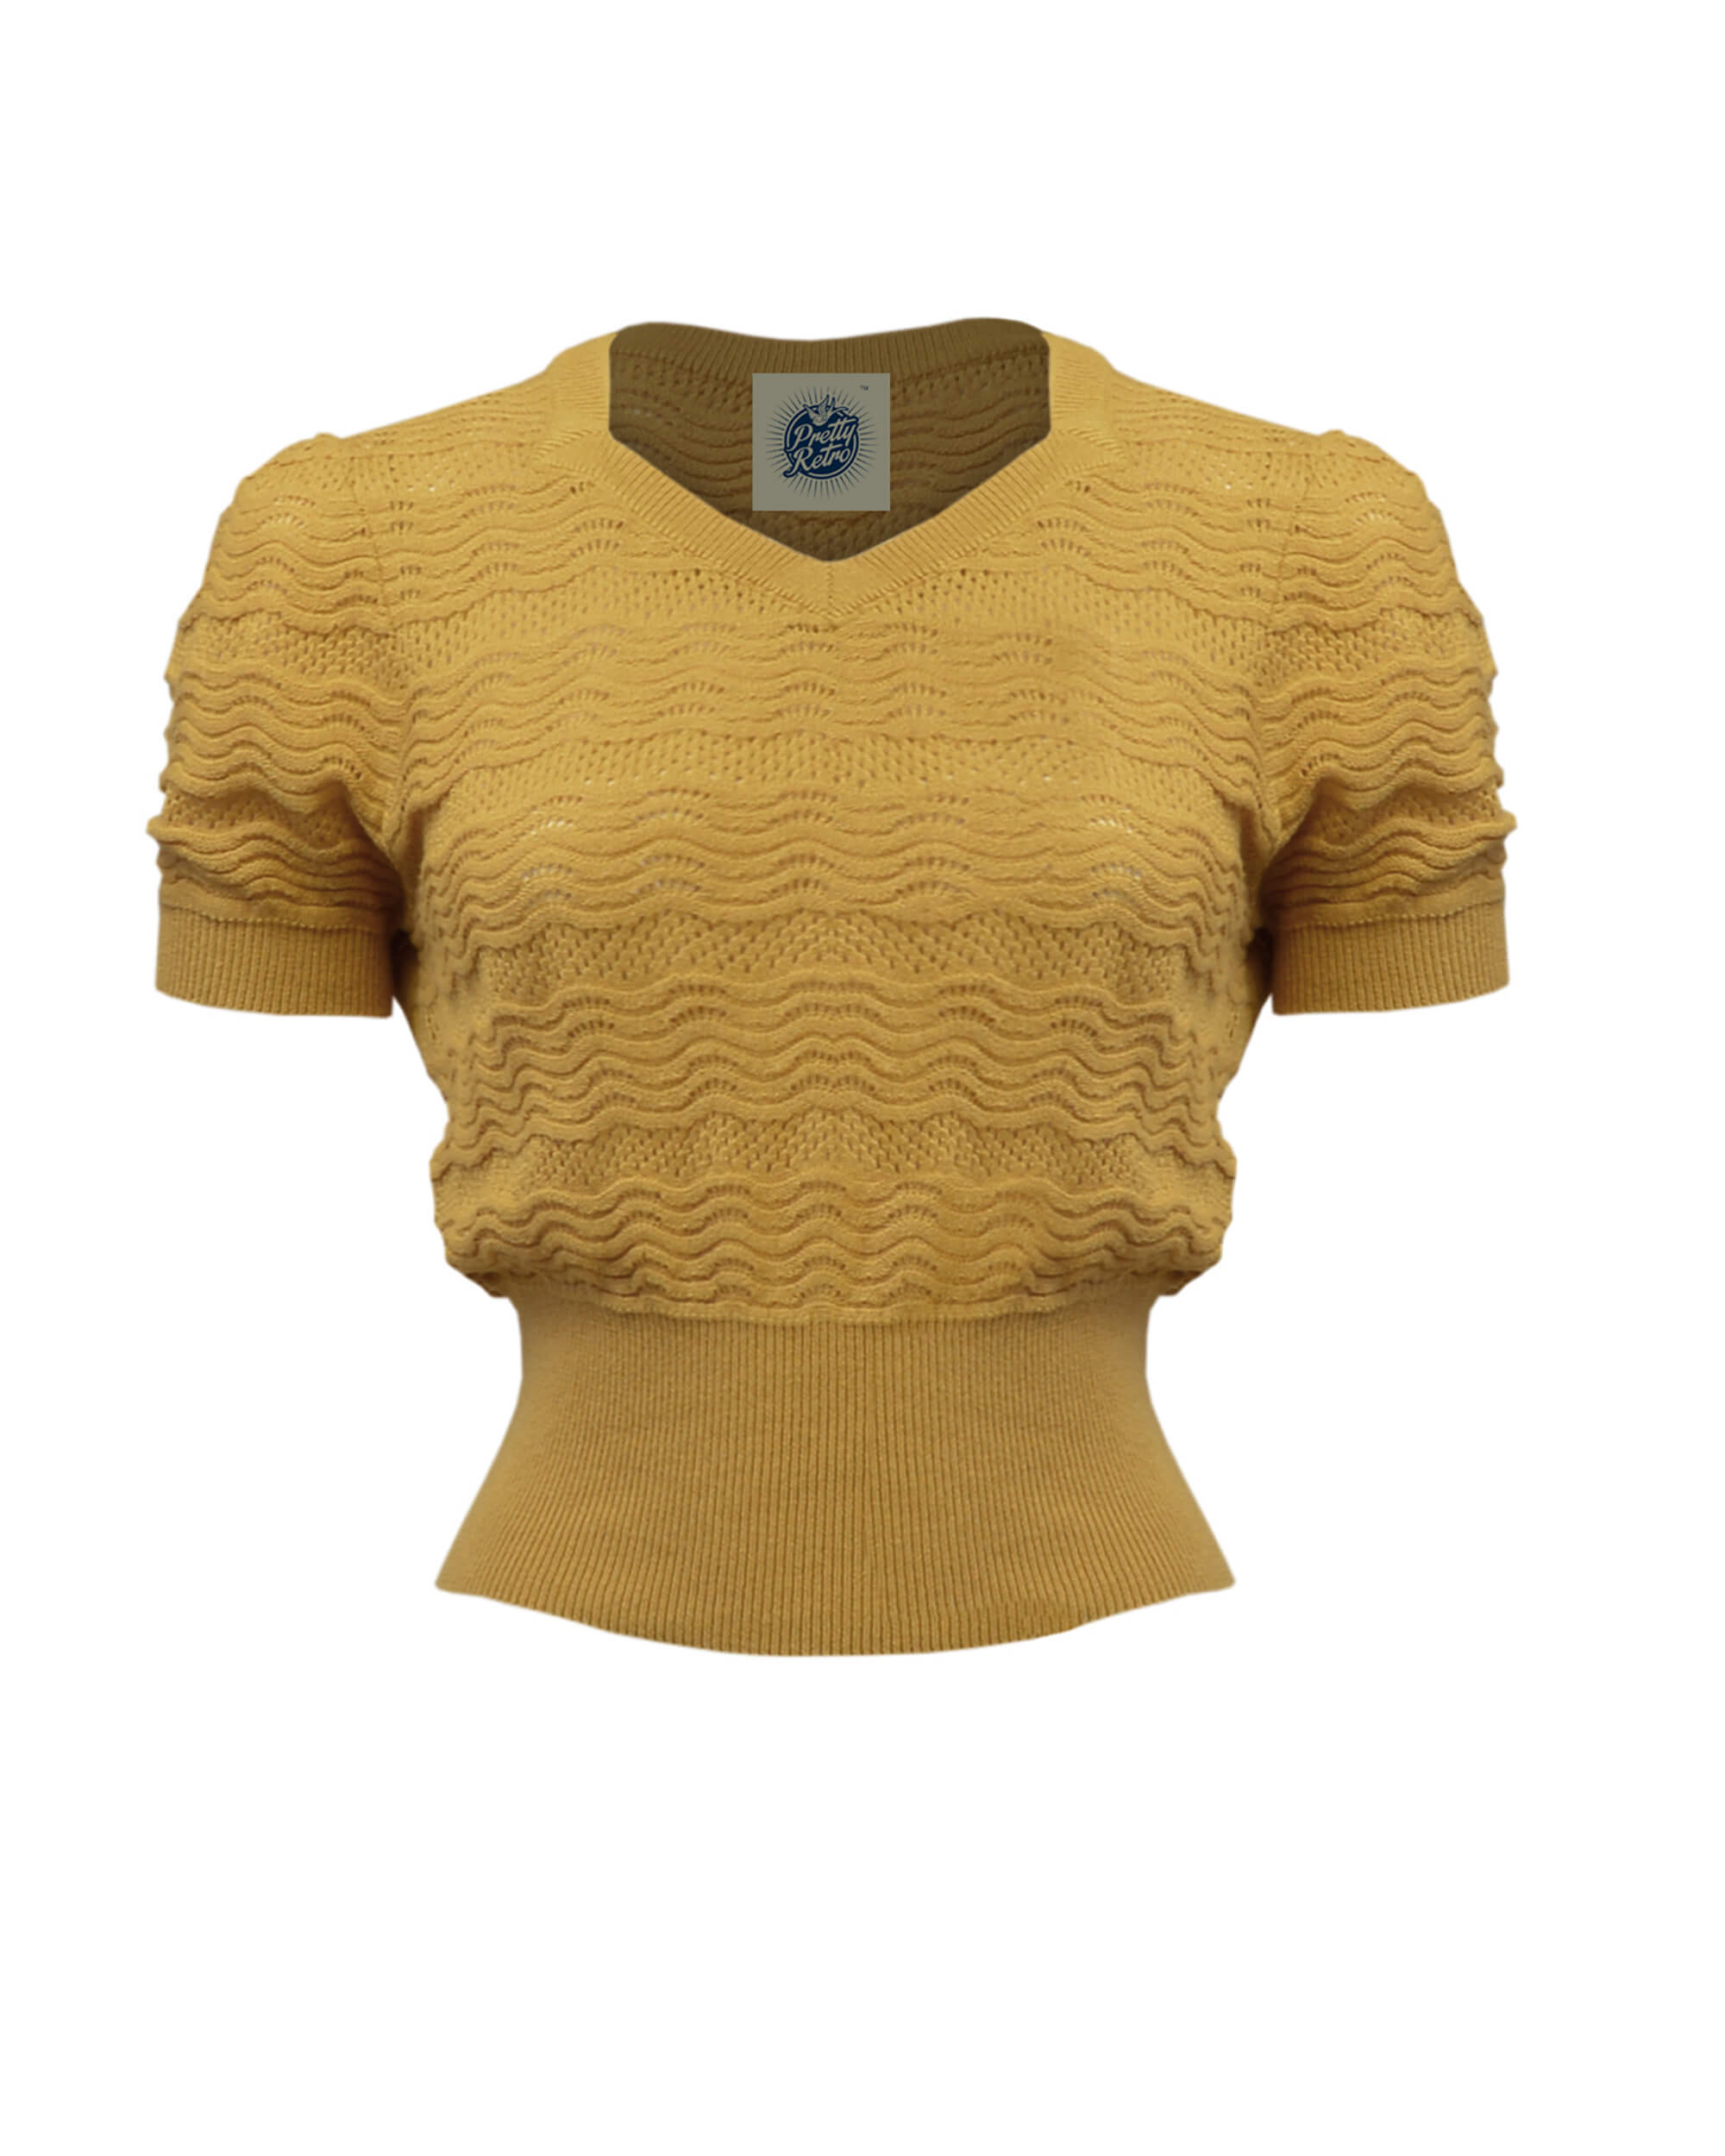 Pretty Sweetheart Top - Gold